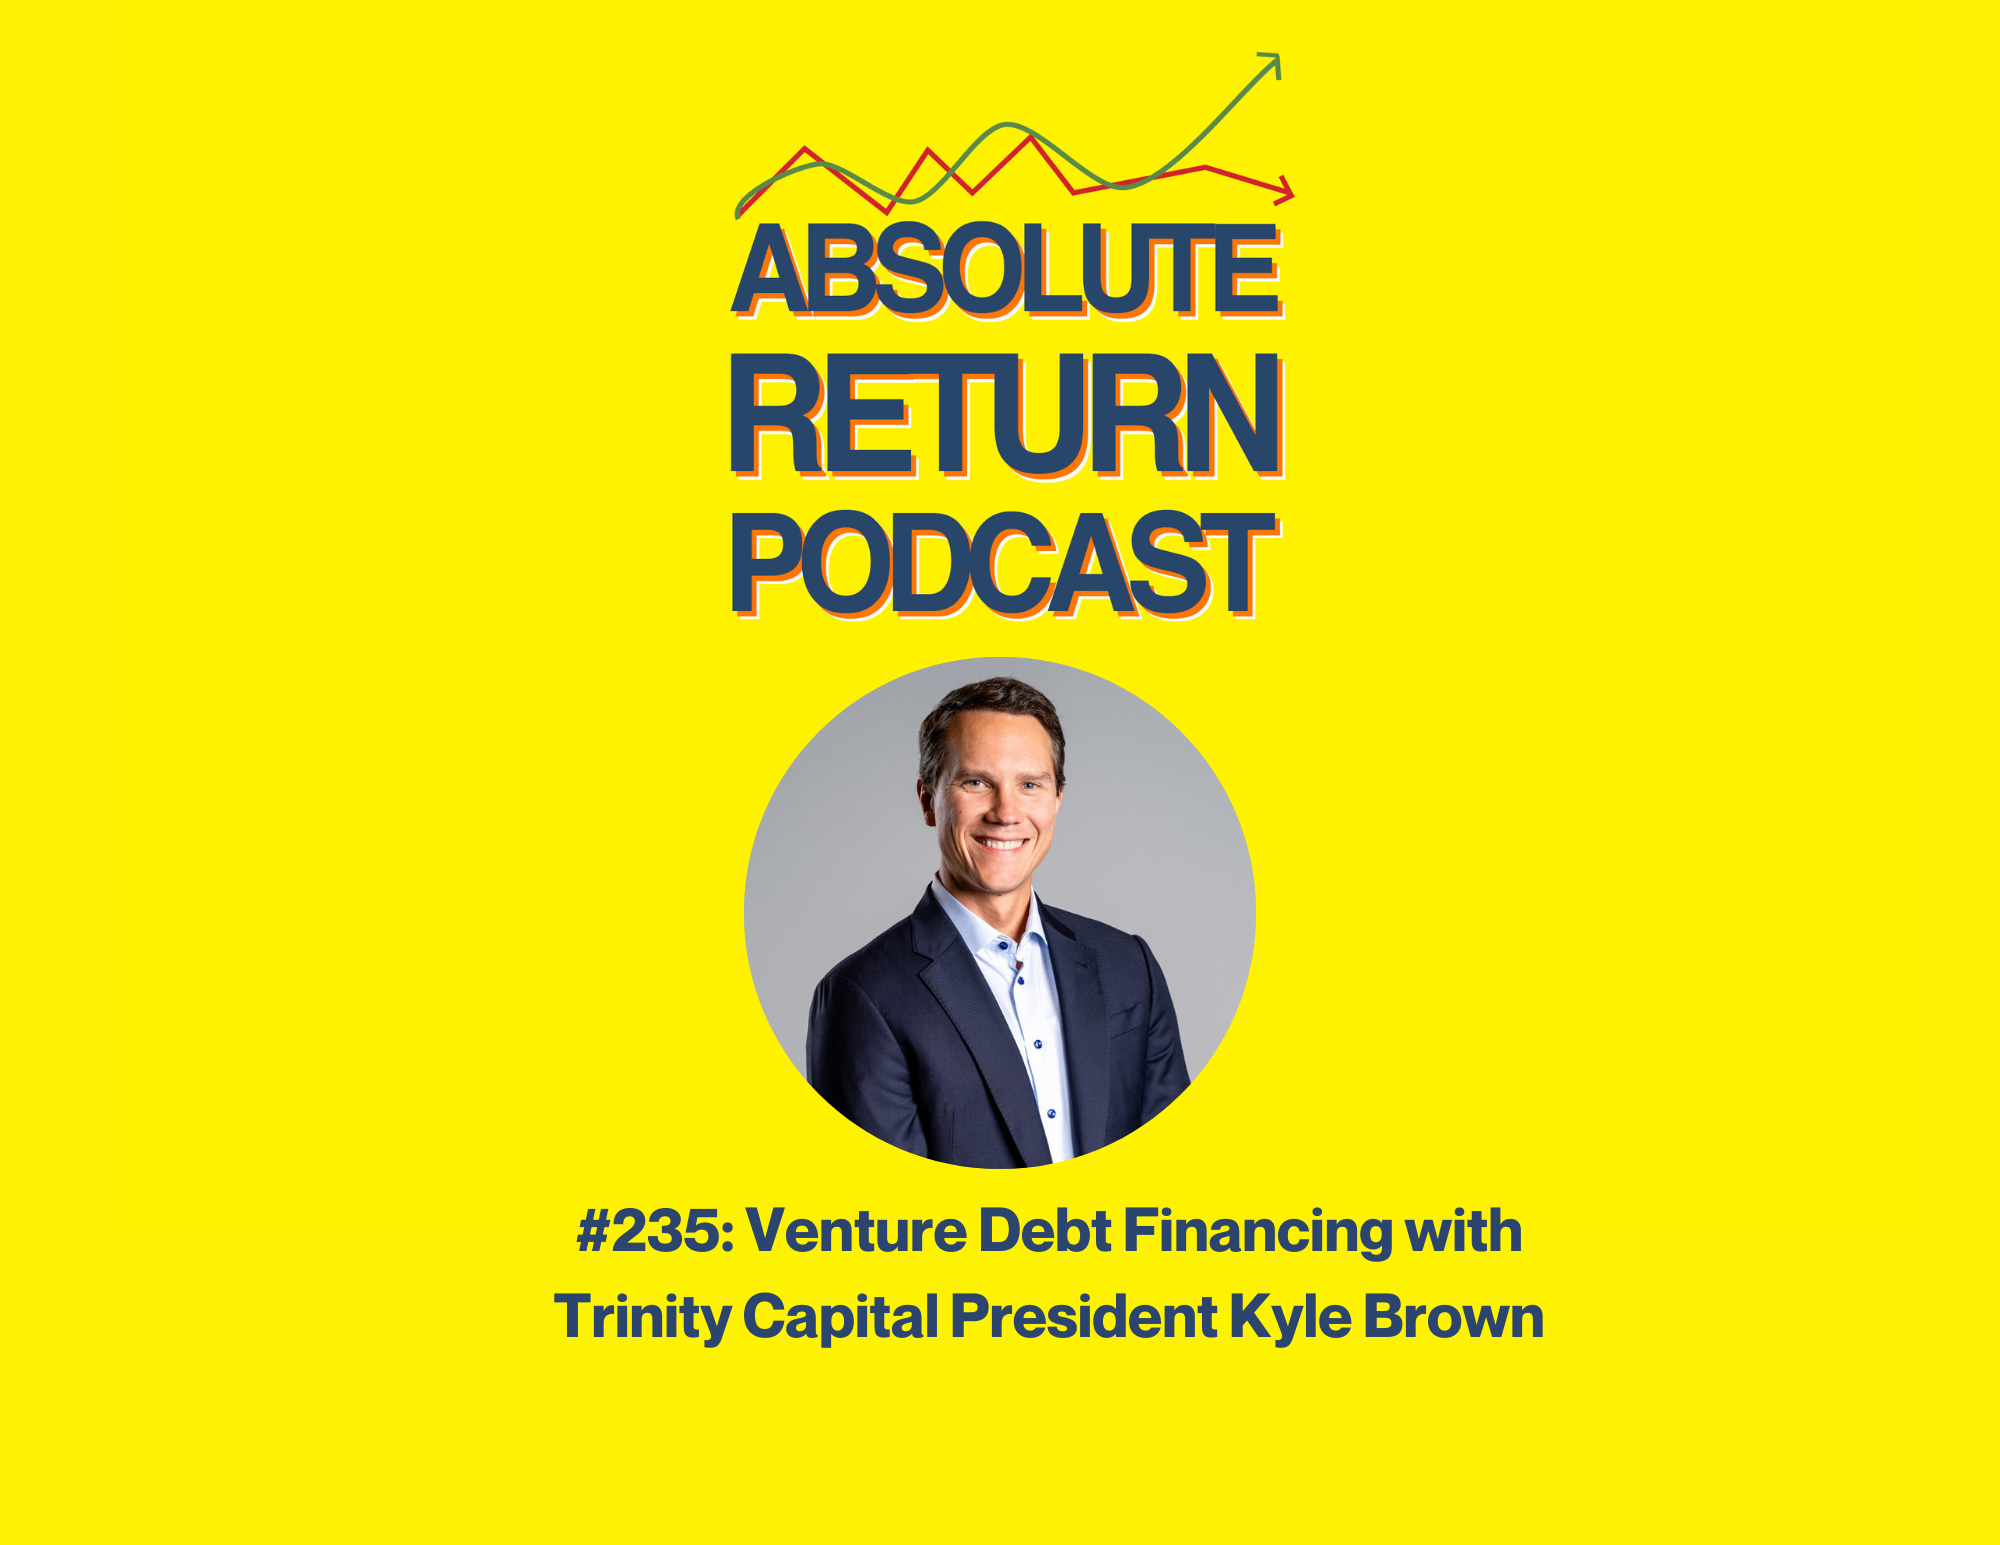 Absolute Return Podcast #235: Venture Debt Financing with Trinity Capital President Kyle Brown